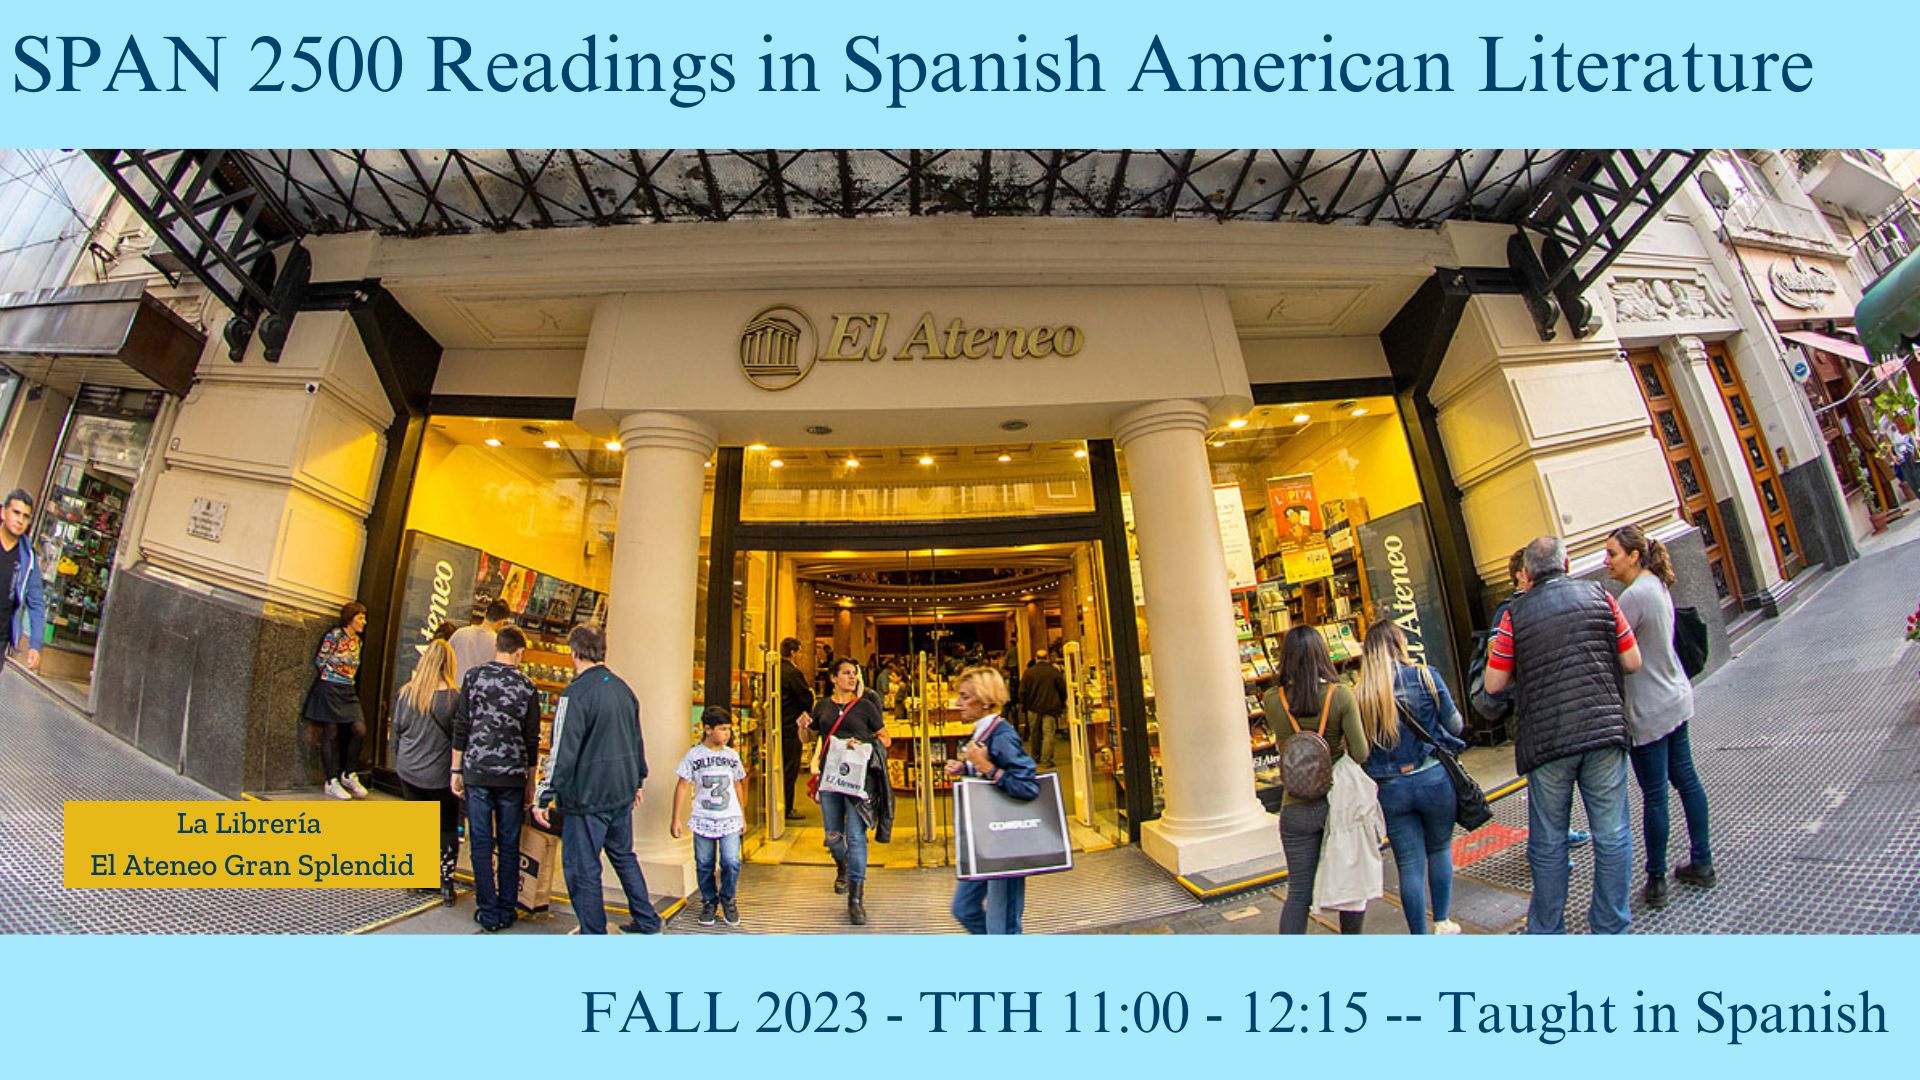 SPAN 2500 Readings in Spanish American Literature - Fall 2023 - Tuesday Thursday 11:00 am to 12:15 pm - Taught in Spanish